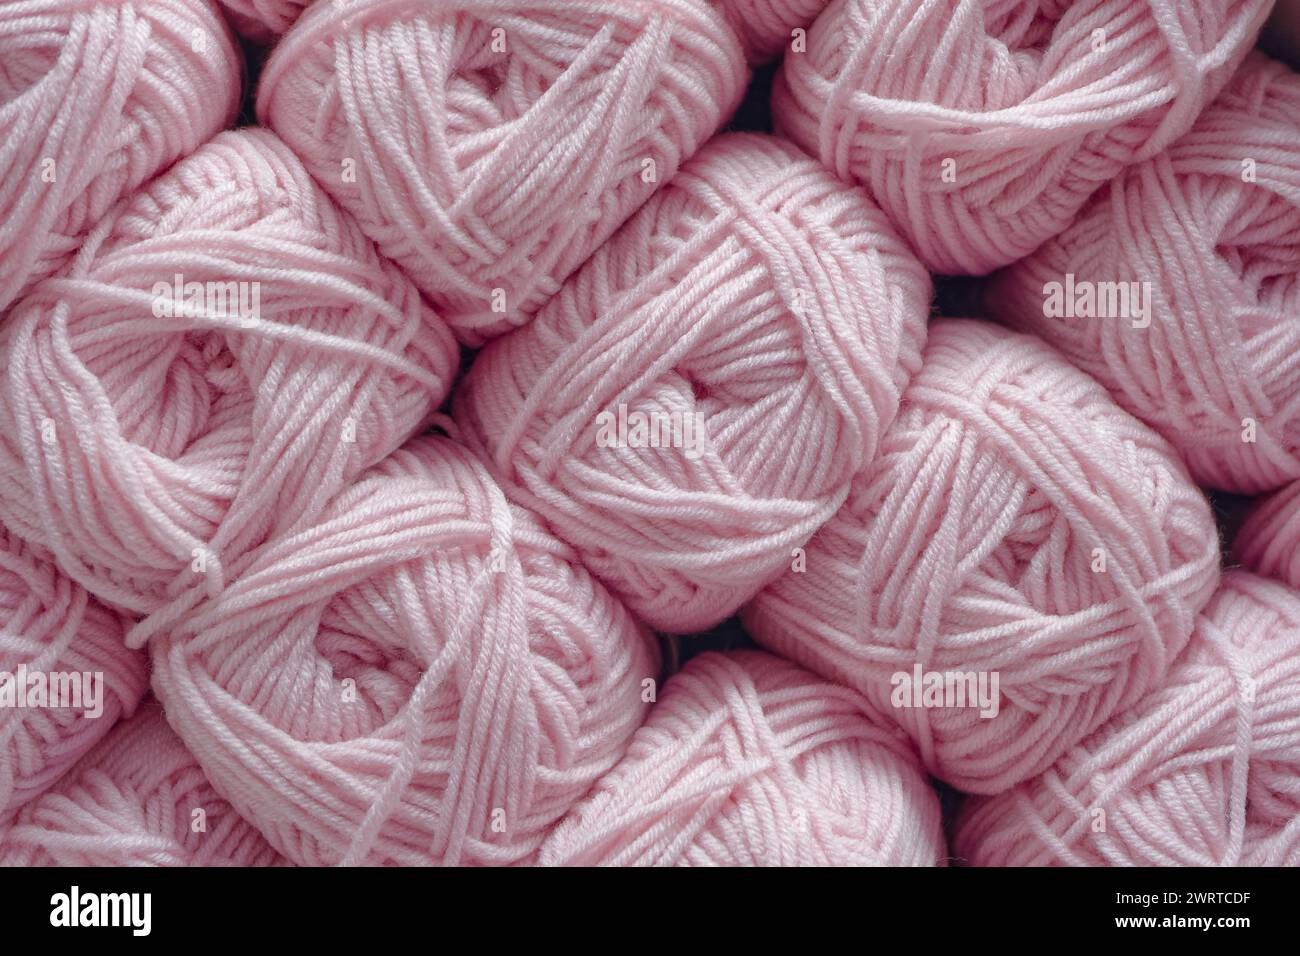 Multiple balls of pink threads, abstract textile background Stock Photo